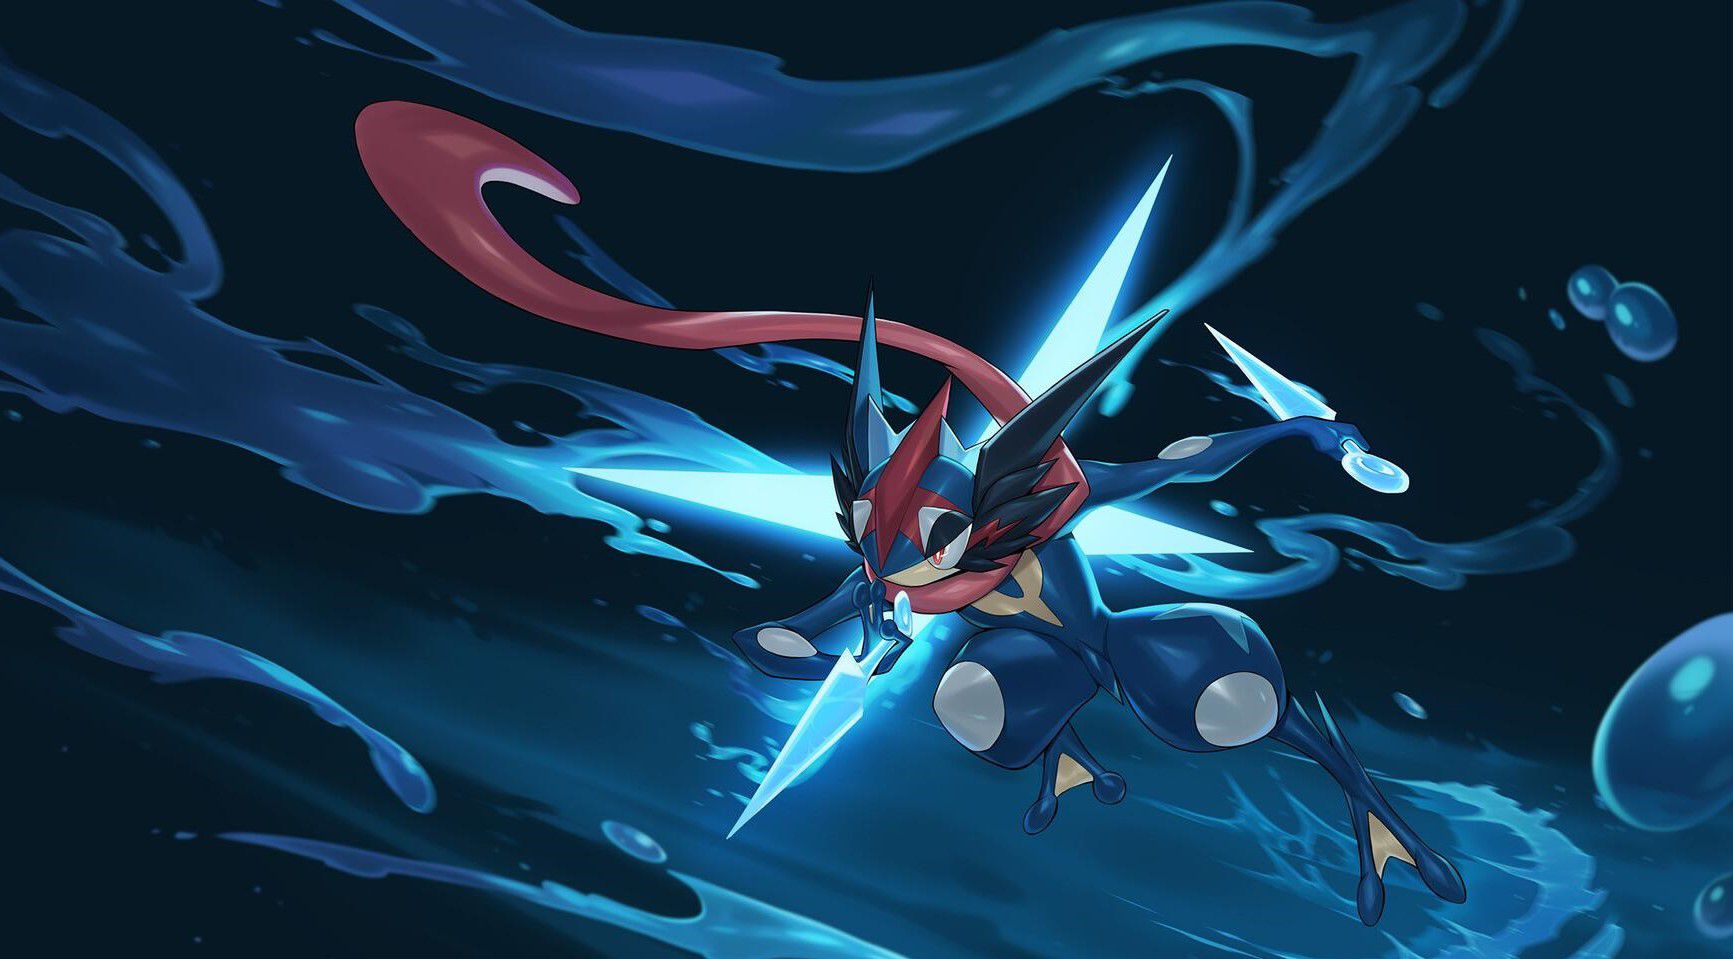 28 Interesting And Amazing Facts About Greninja From Pokemon Tons Of.